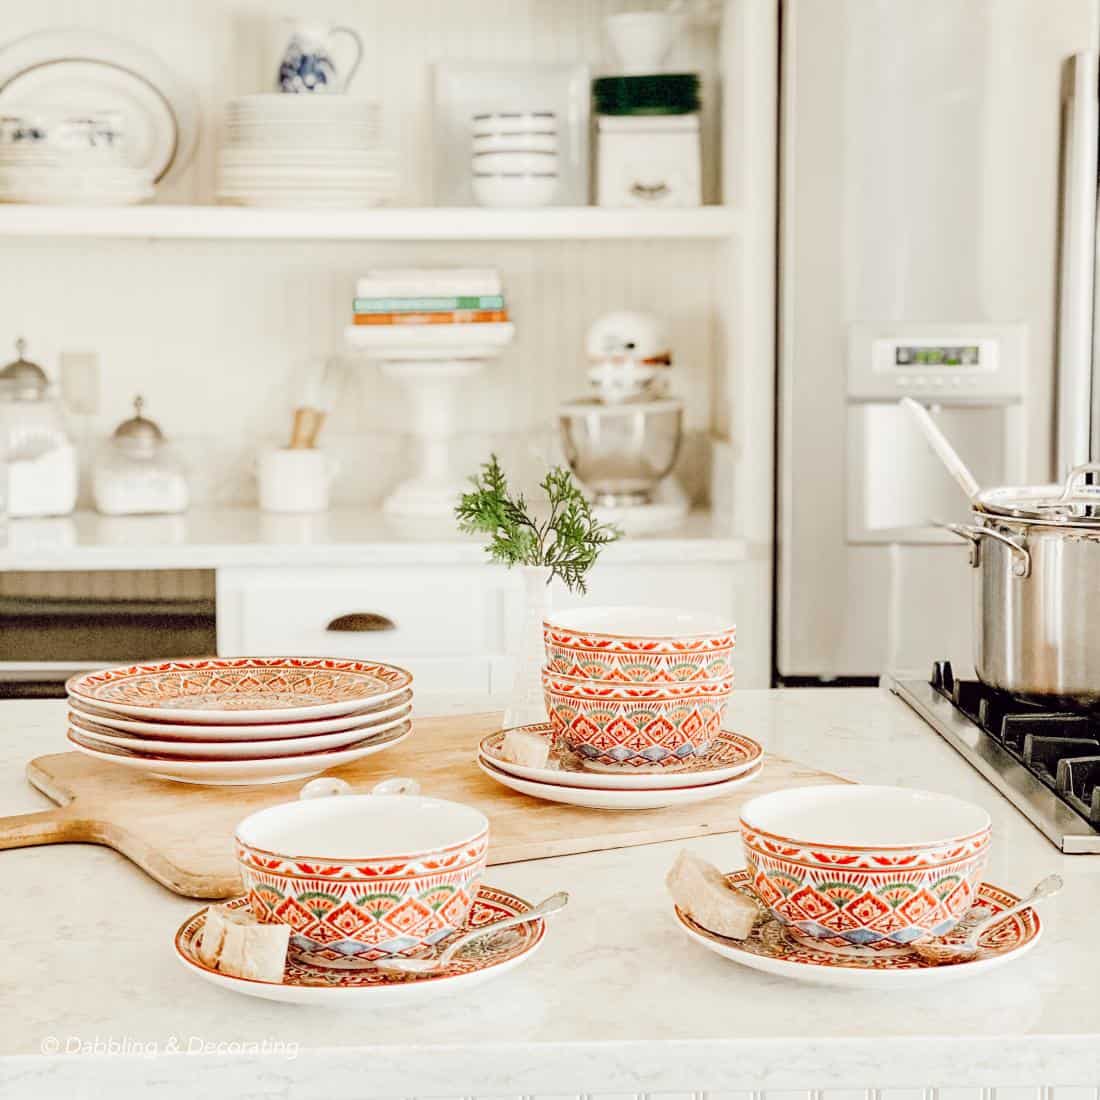 Soup's on with Bico Ceramics as the Best Everyday Dishware